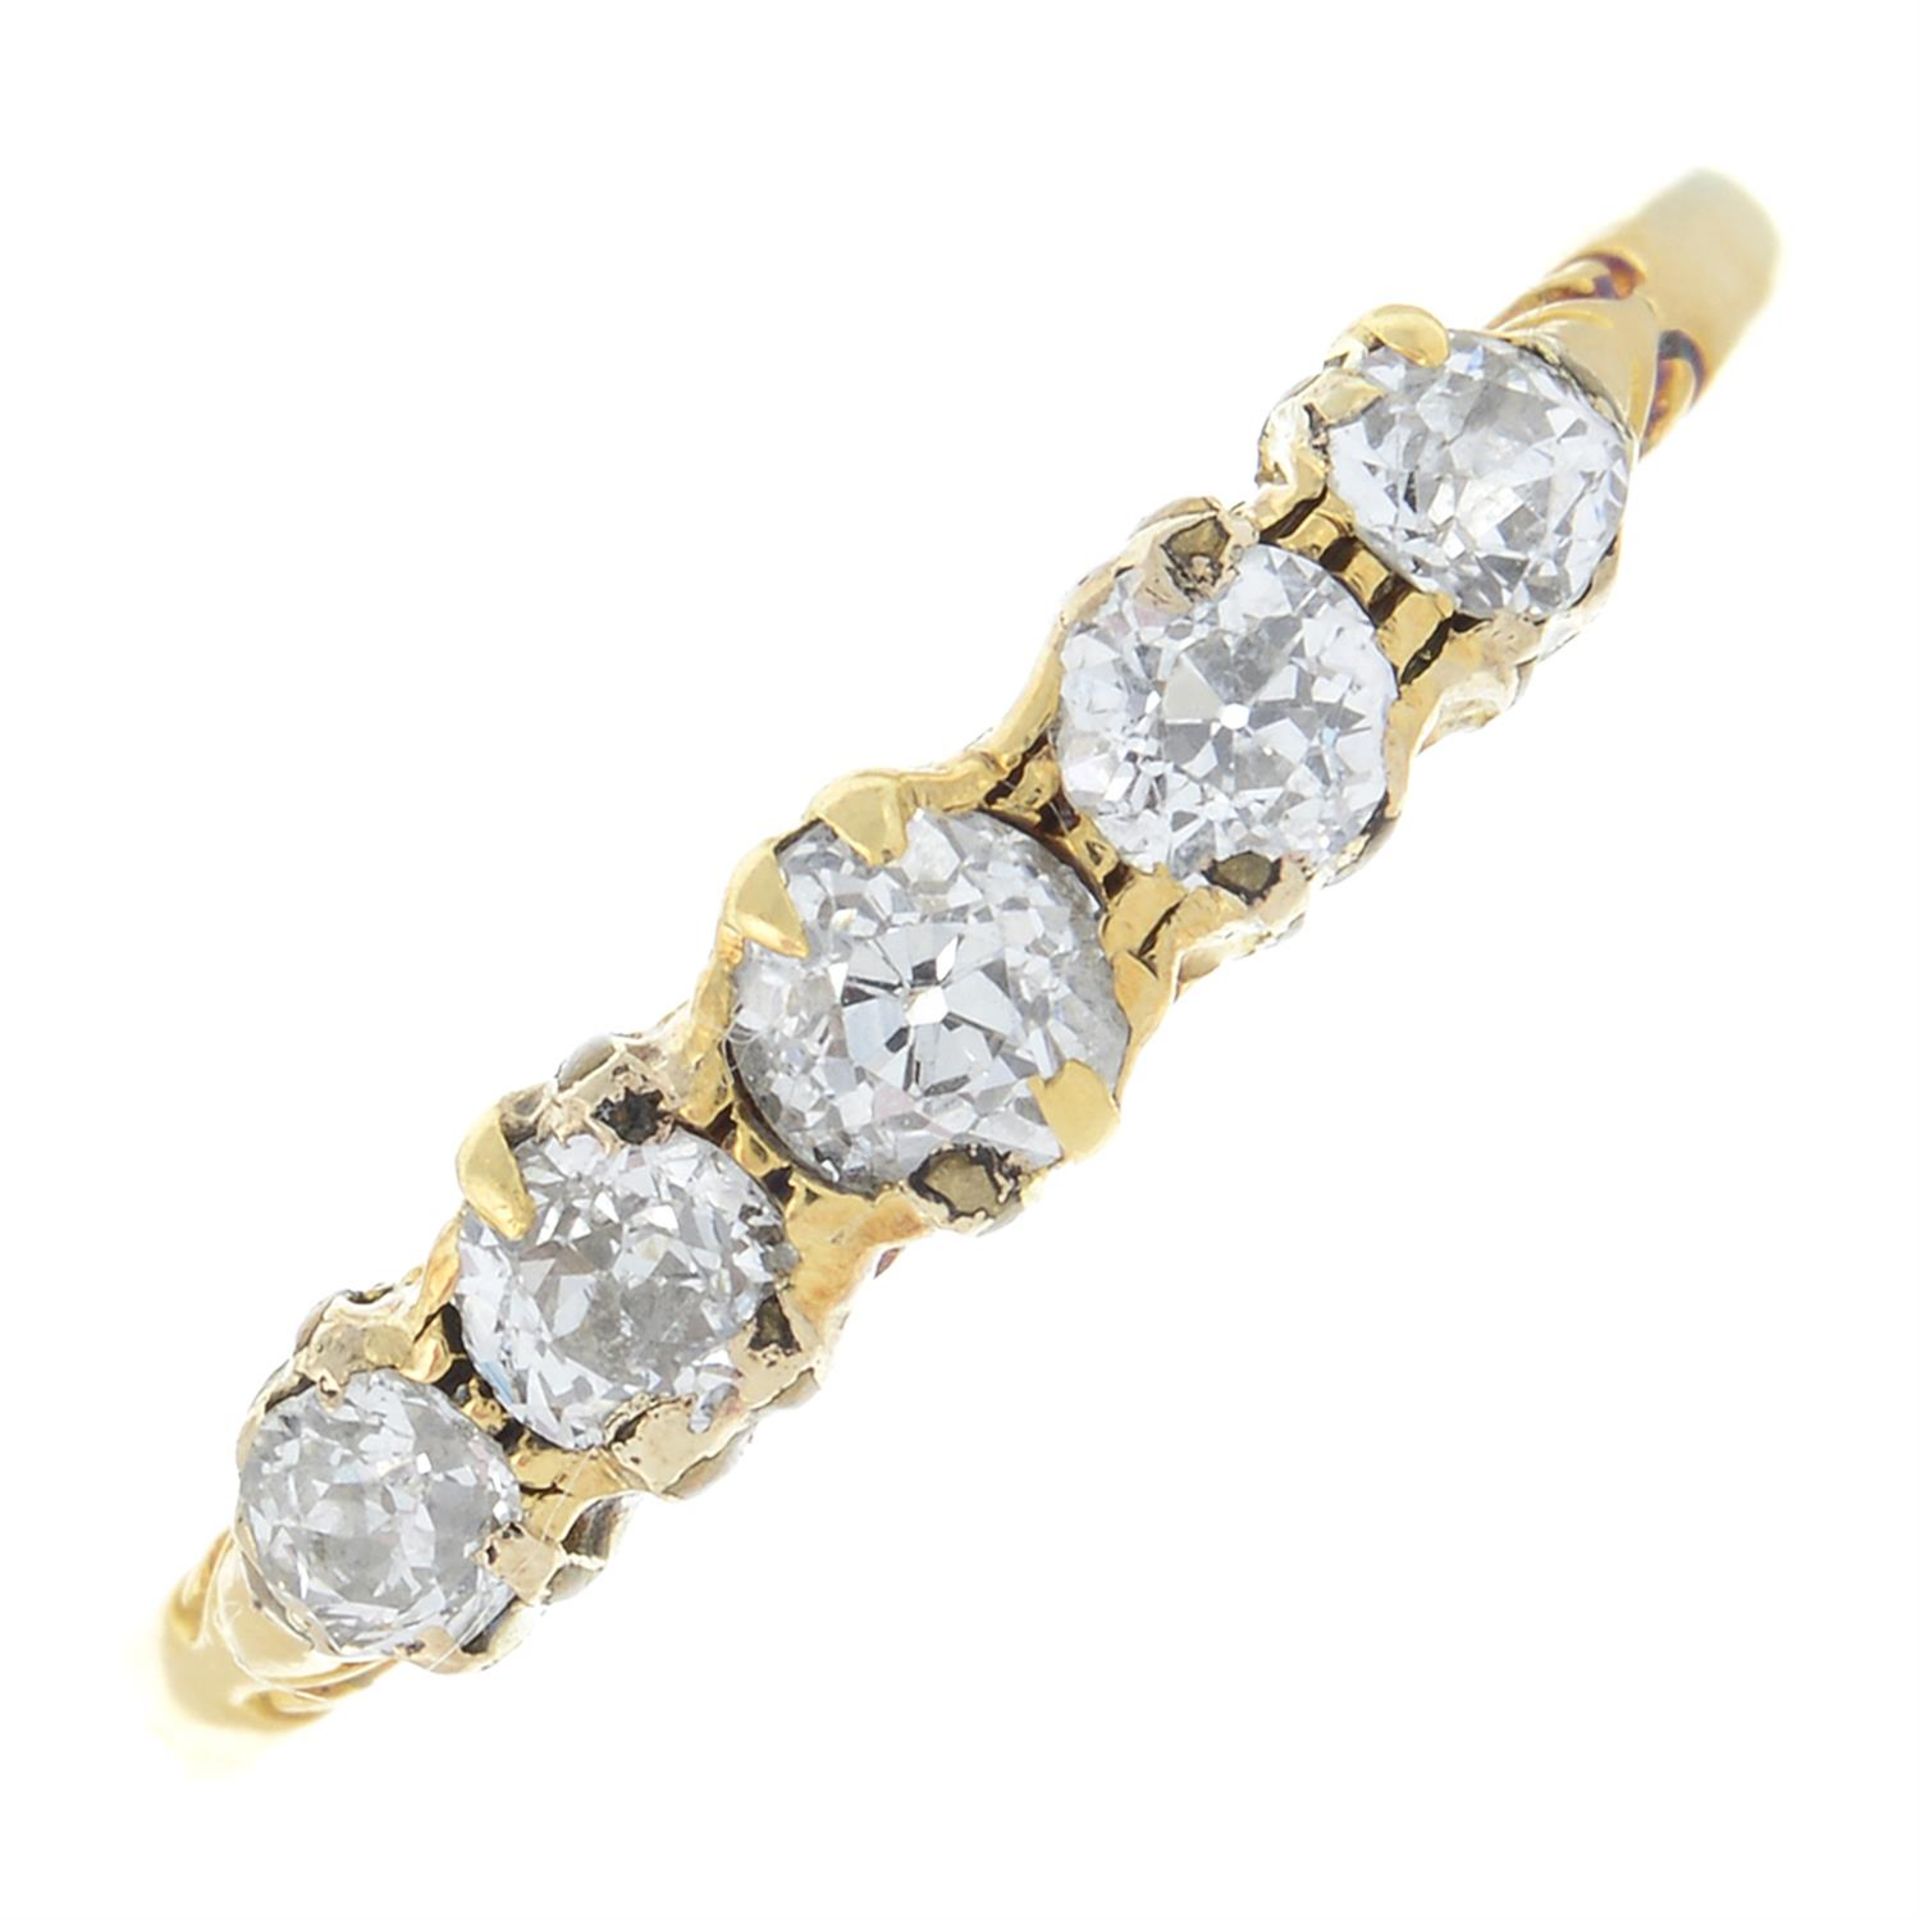 An Late Victorian 18ct gold old-cut diamond five-stone ring.